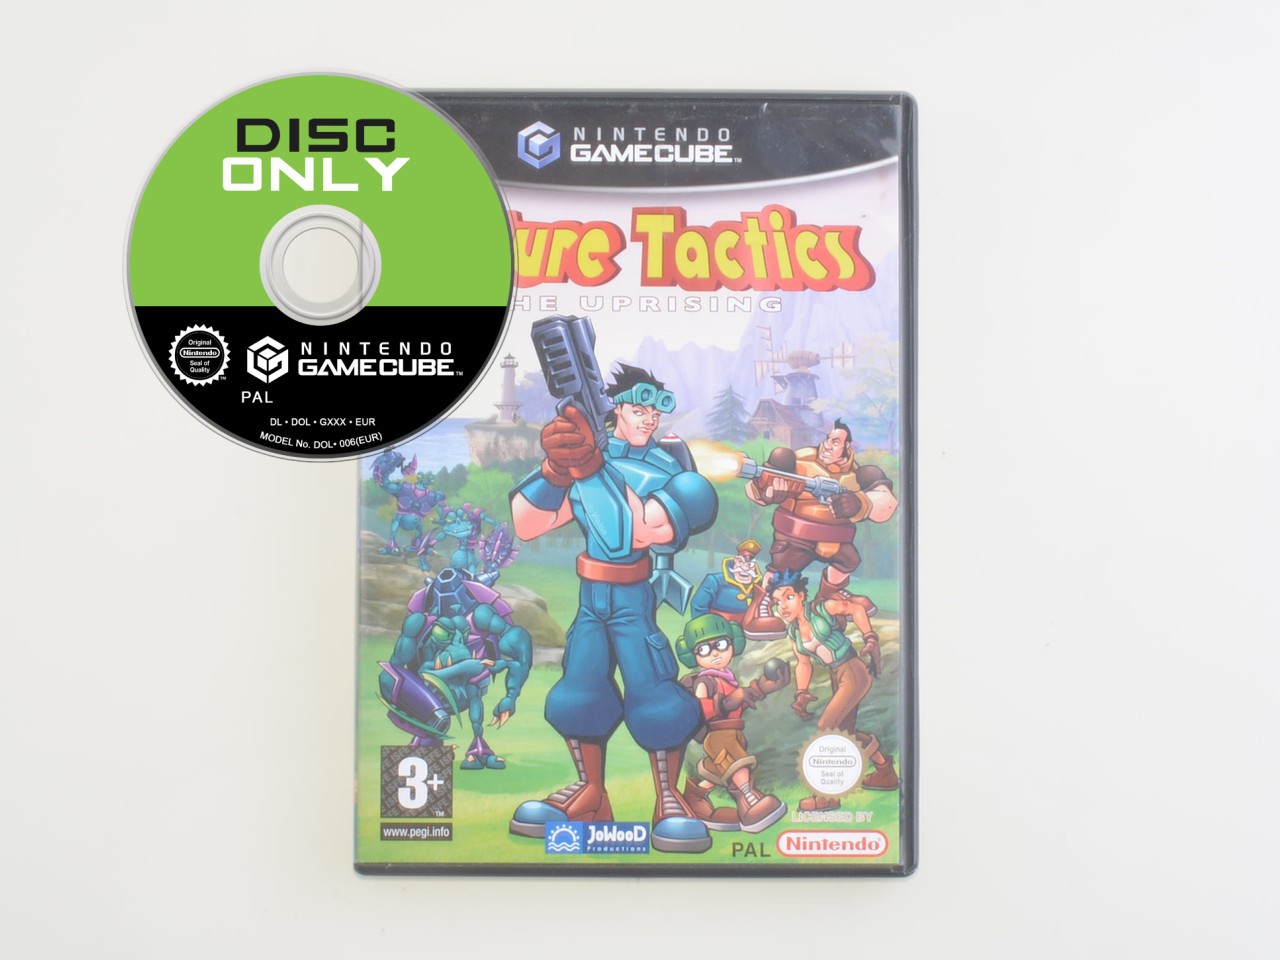 Future Tactics The Uprising - Disc Only Kopen | Gamecube Games